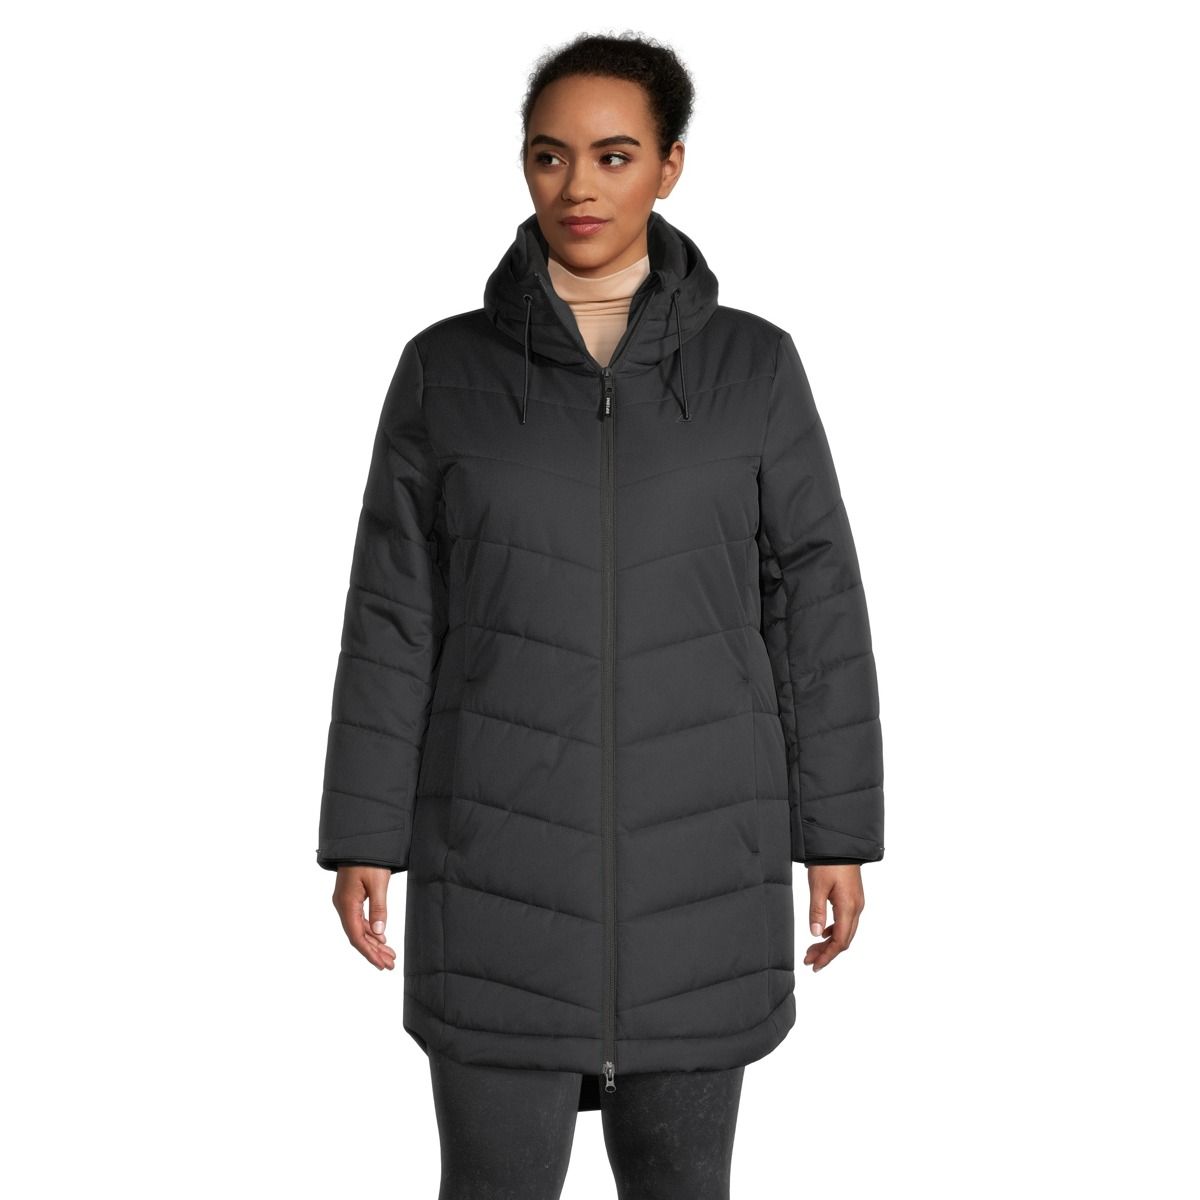 Ripzone Women's Plus 2 Whitehorn Insulated Jacket